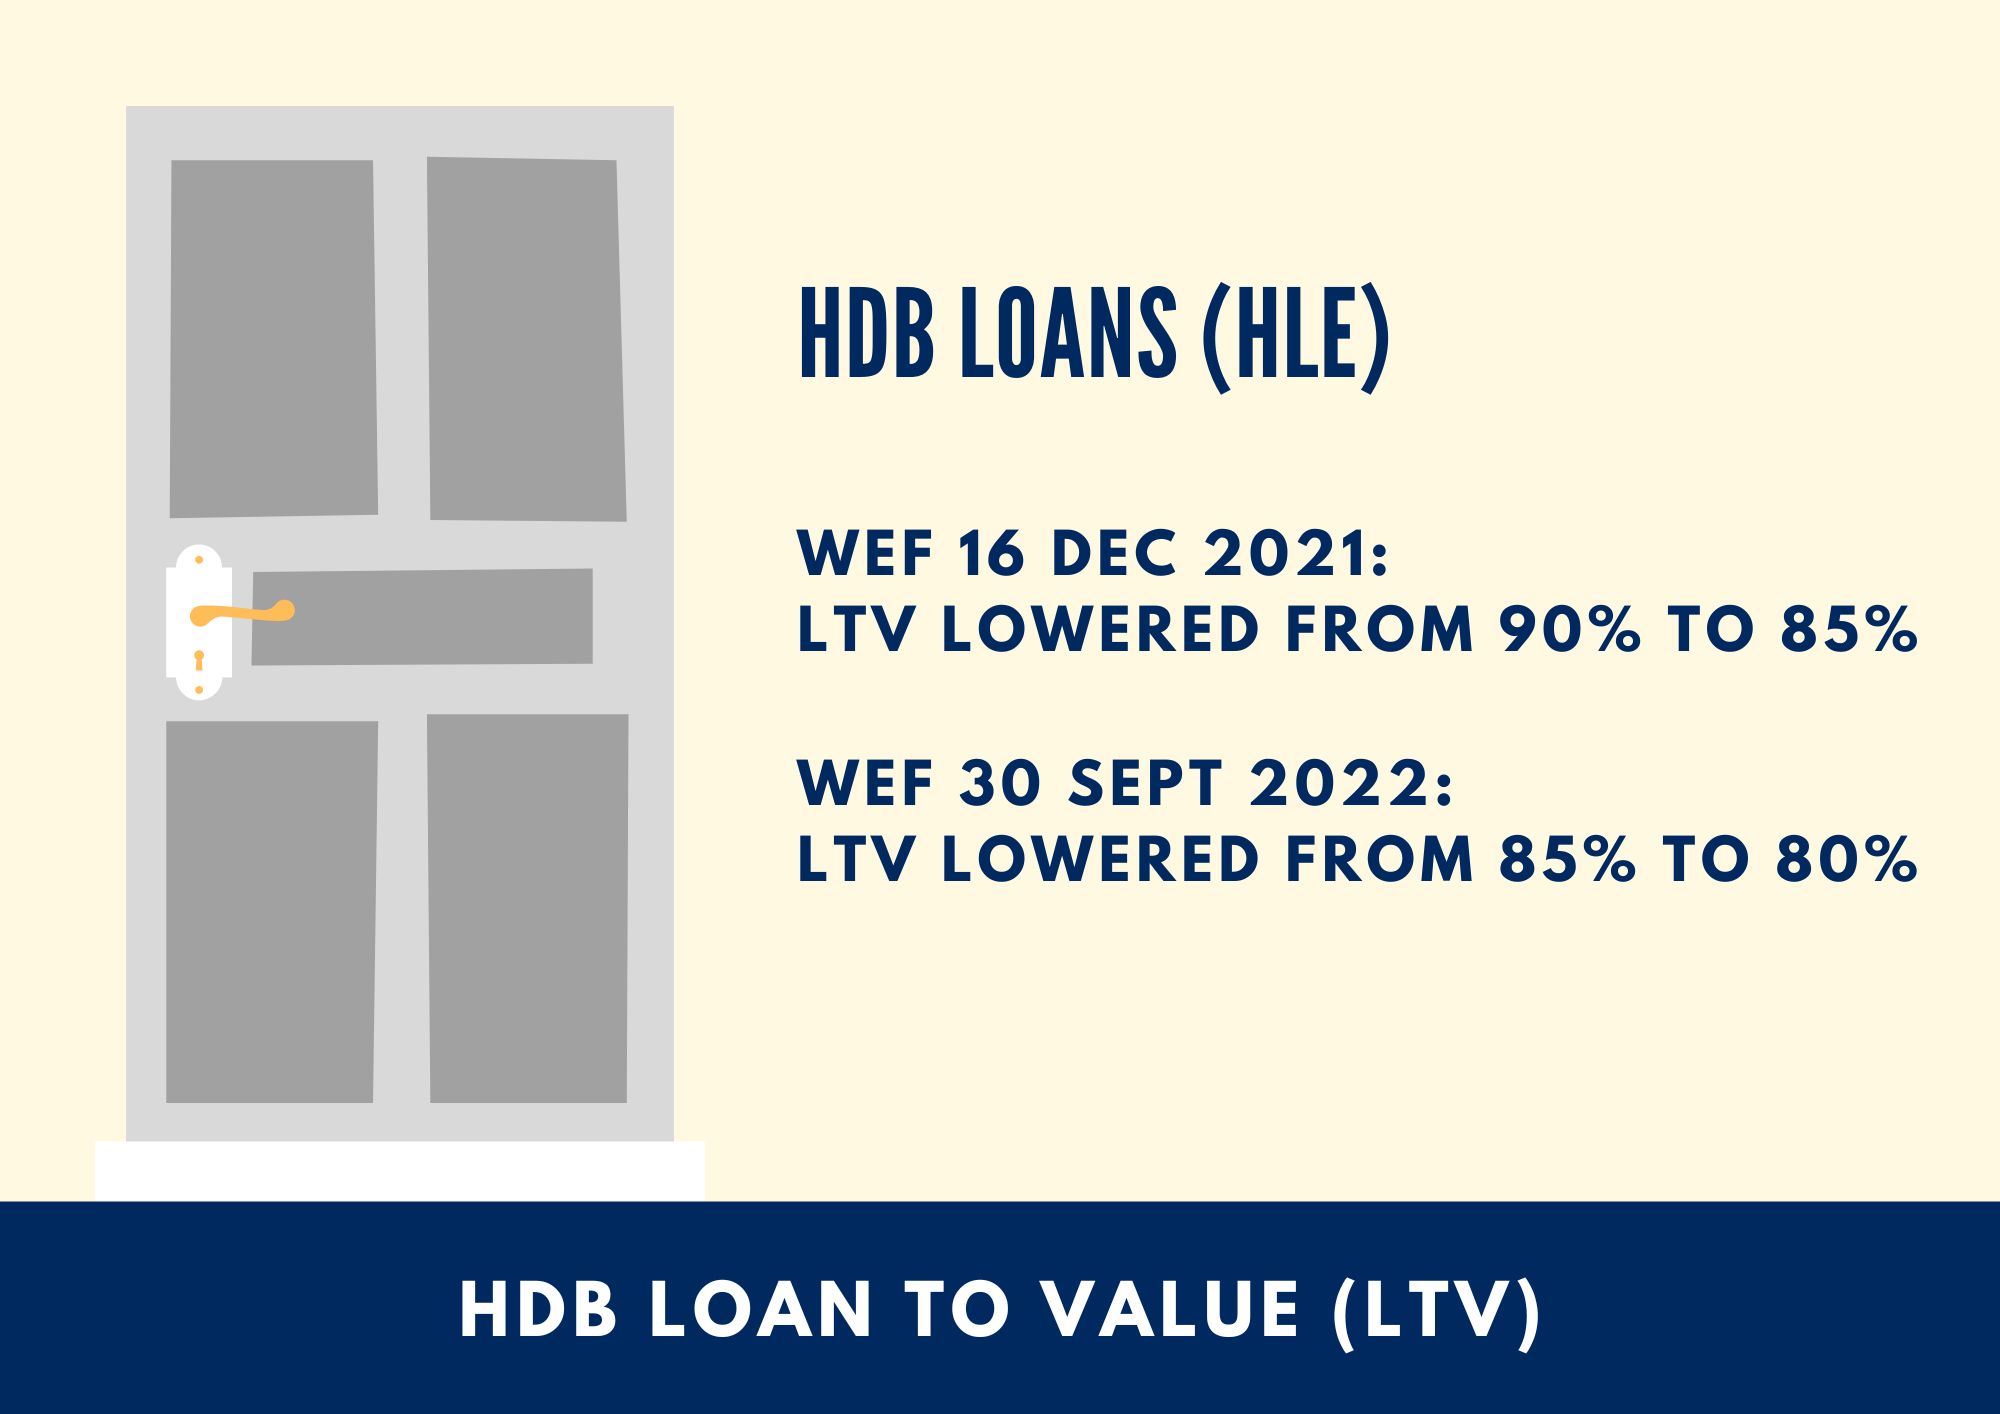 HDB HLE - Loan To Value (LTV) for HDB Flat wef 30 Sept 2022